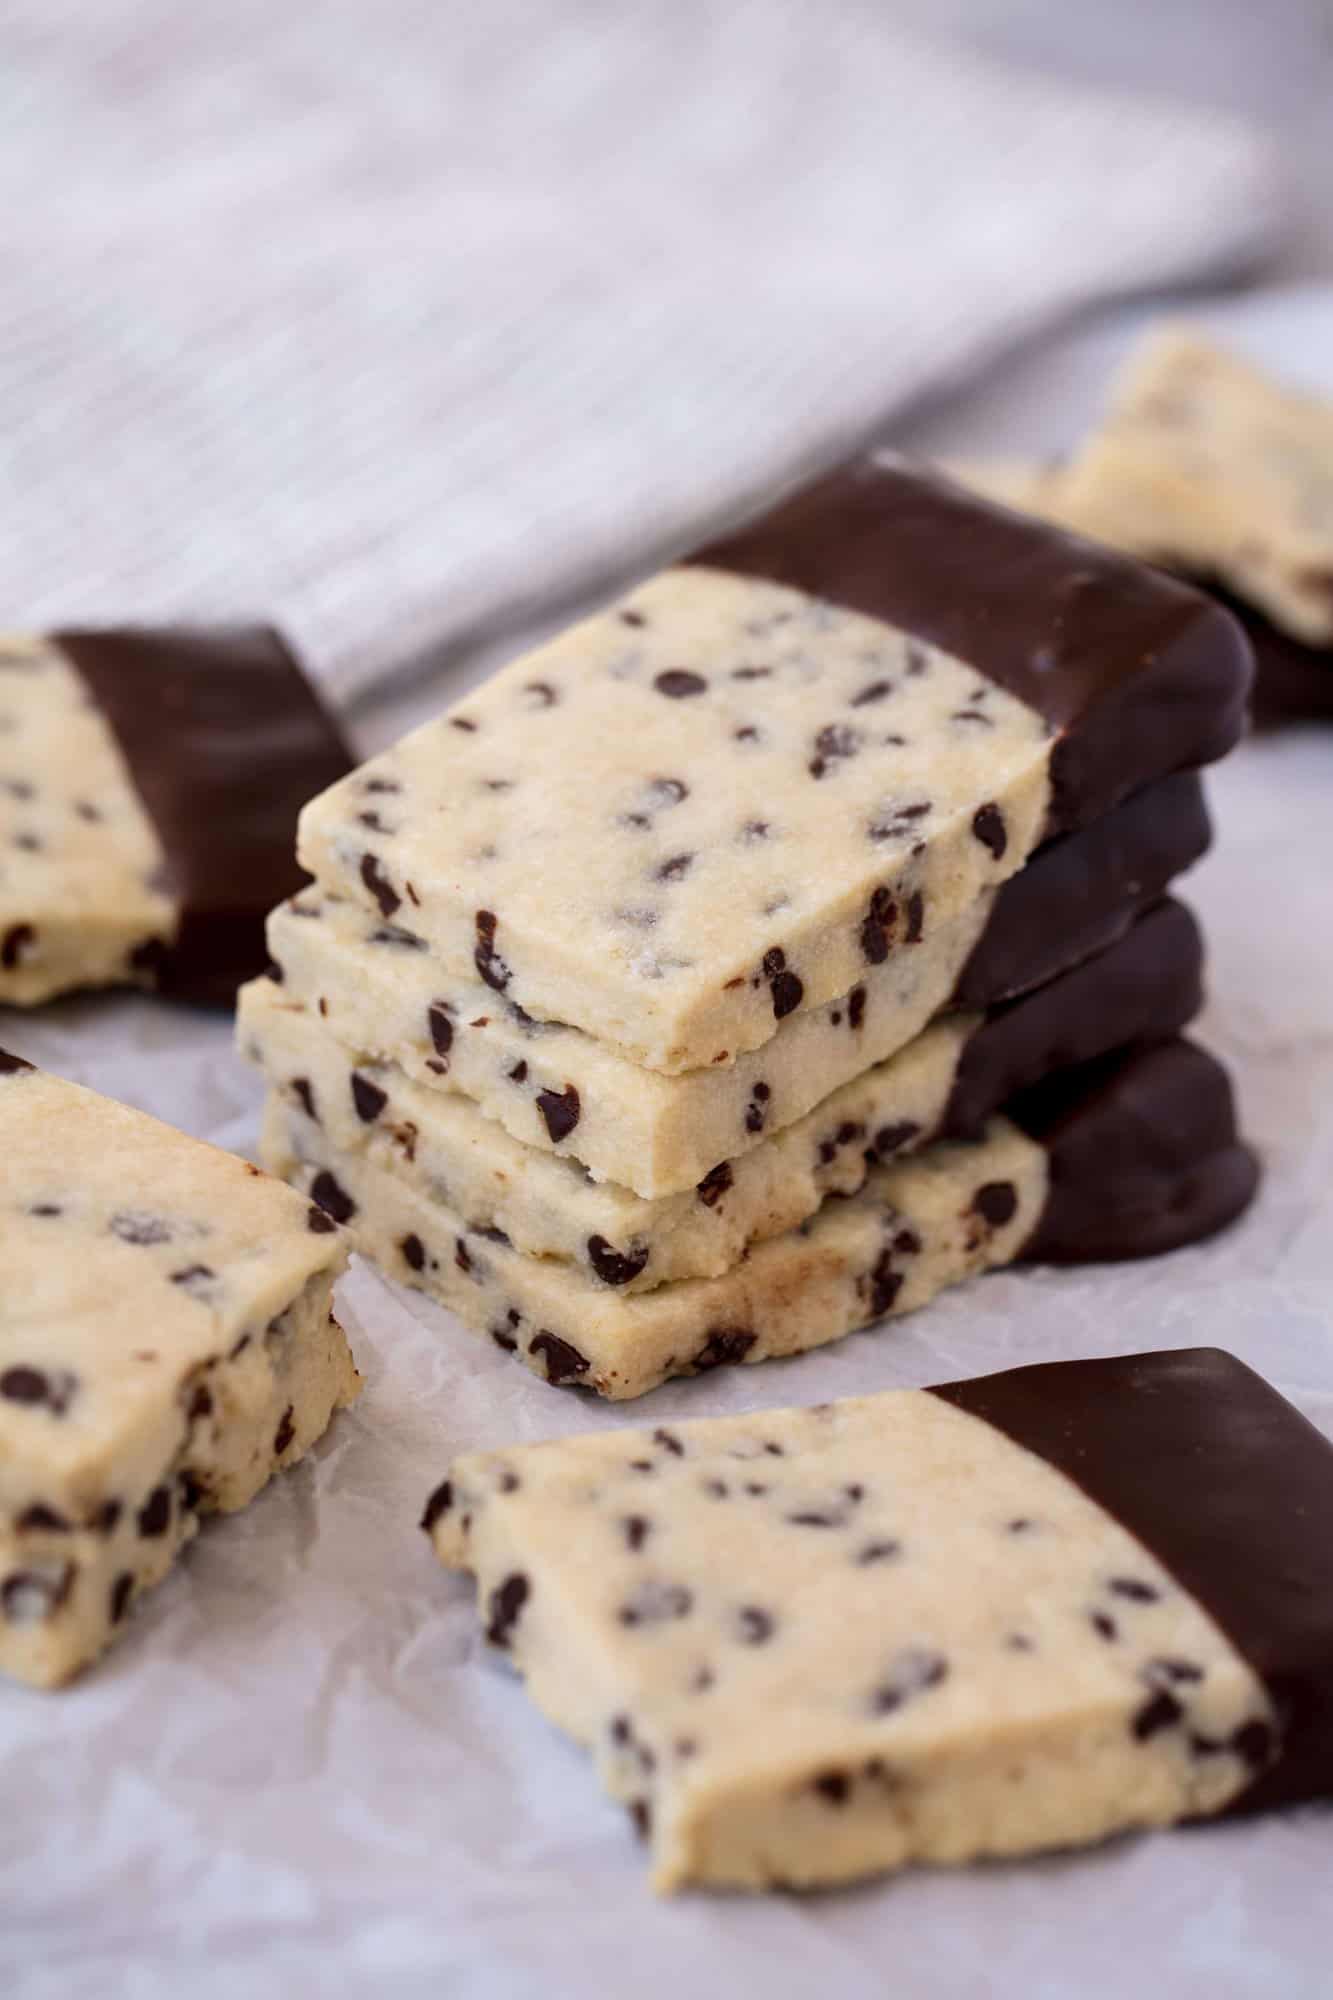 Chocolate Chip Shortbread Cookies are all the goodness of melt-in-your-mouth shortbread combined with a little bit of chocolate. Your family will love these easy tasty cookies!